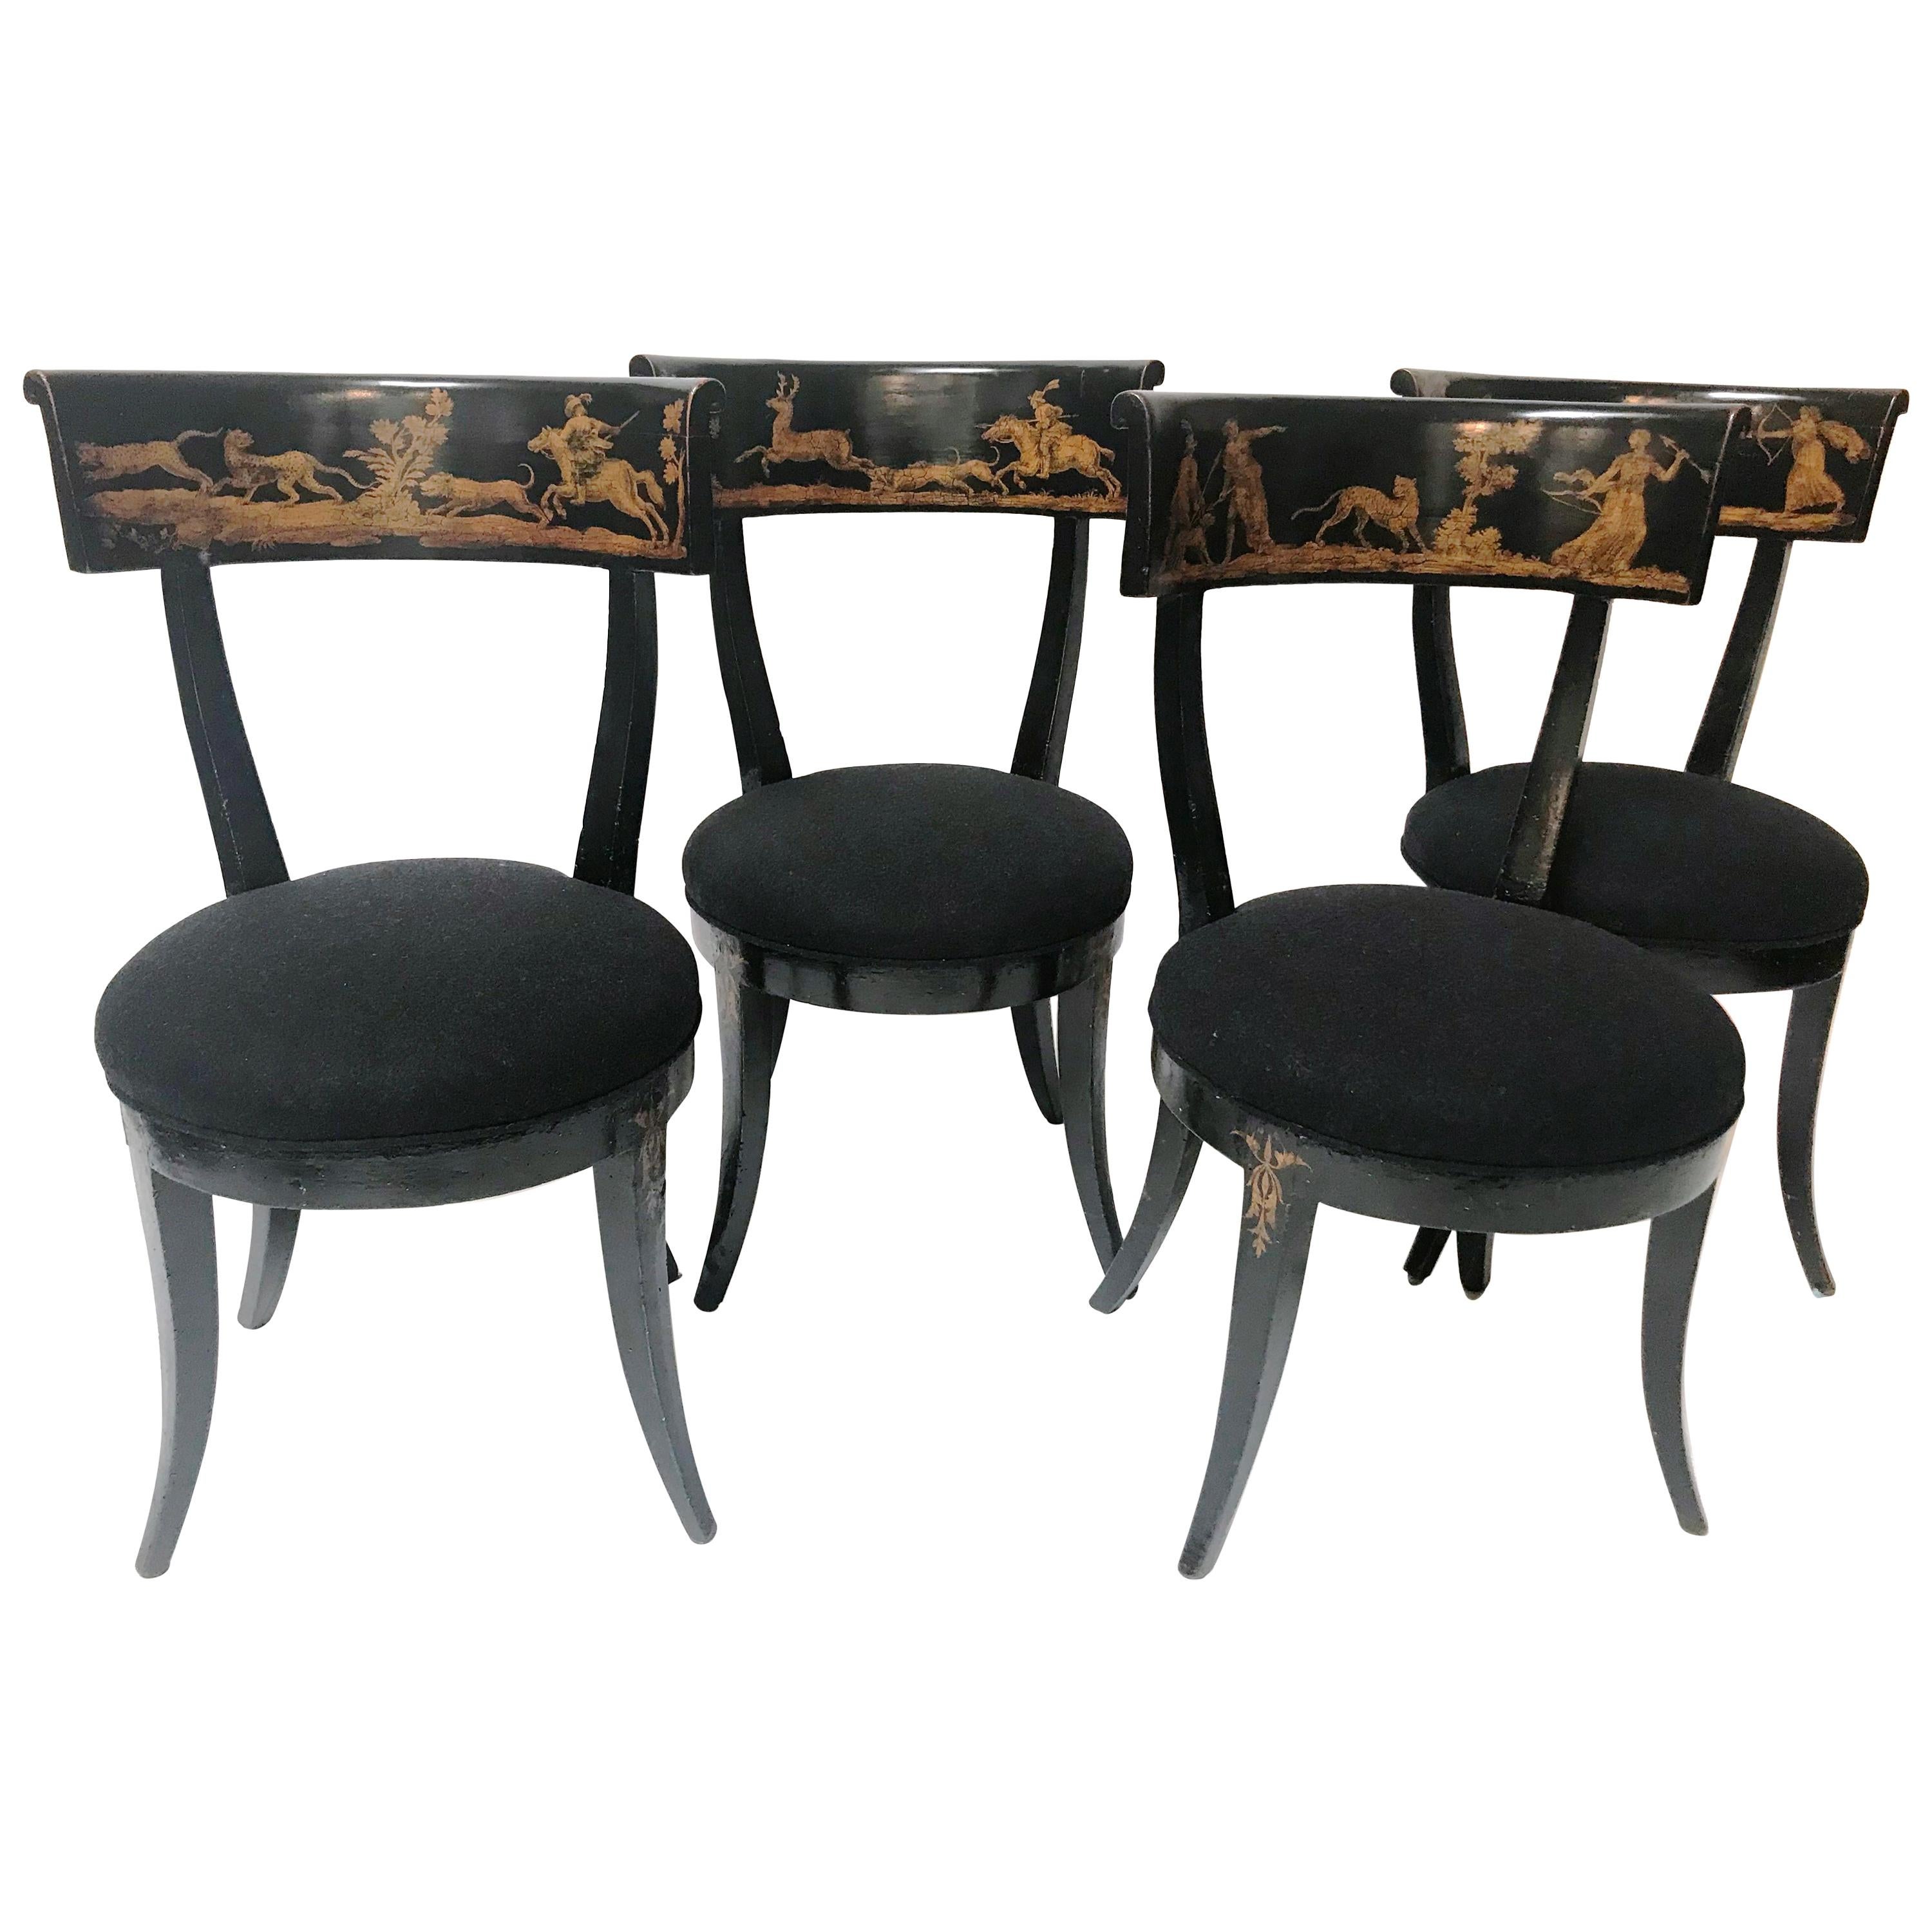 Late 18th Century Set of 4 Florentine Directoire Black Lacquer Saber Leg Chairs For Sale